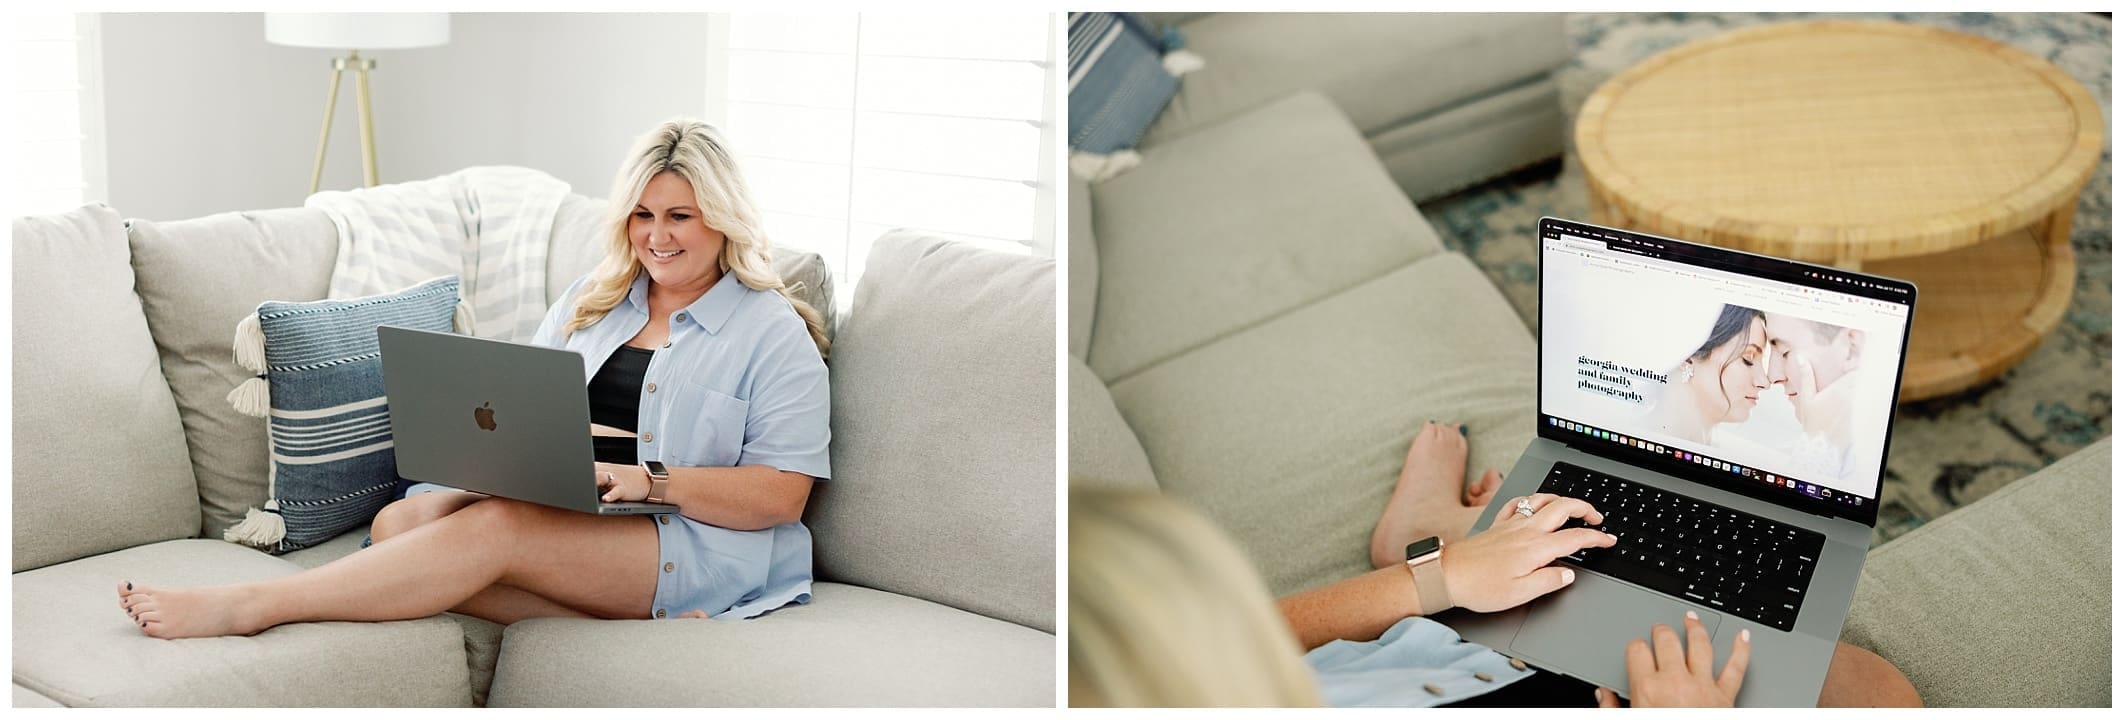 Two pictures of a woman using a laptop on a couch.